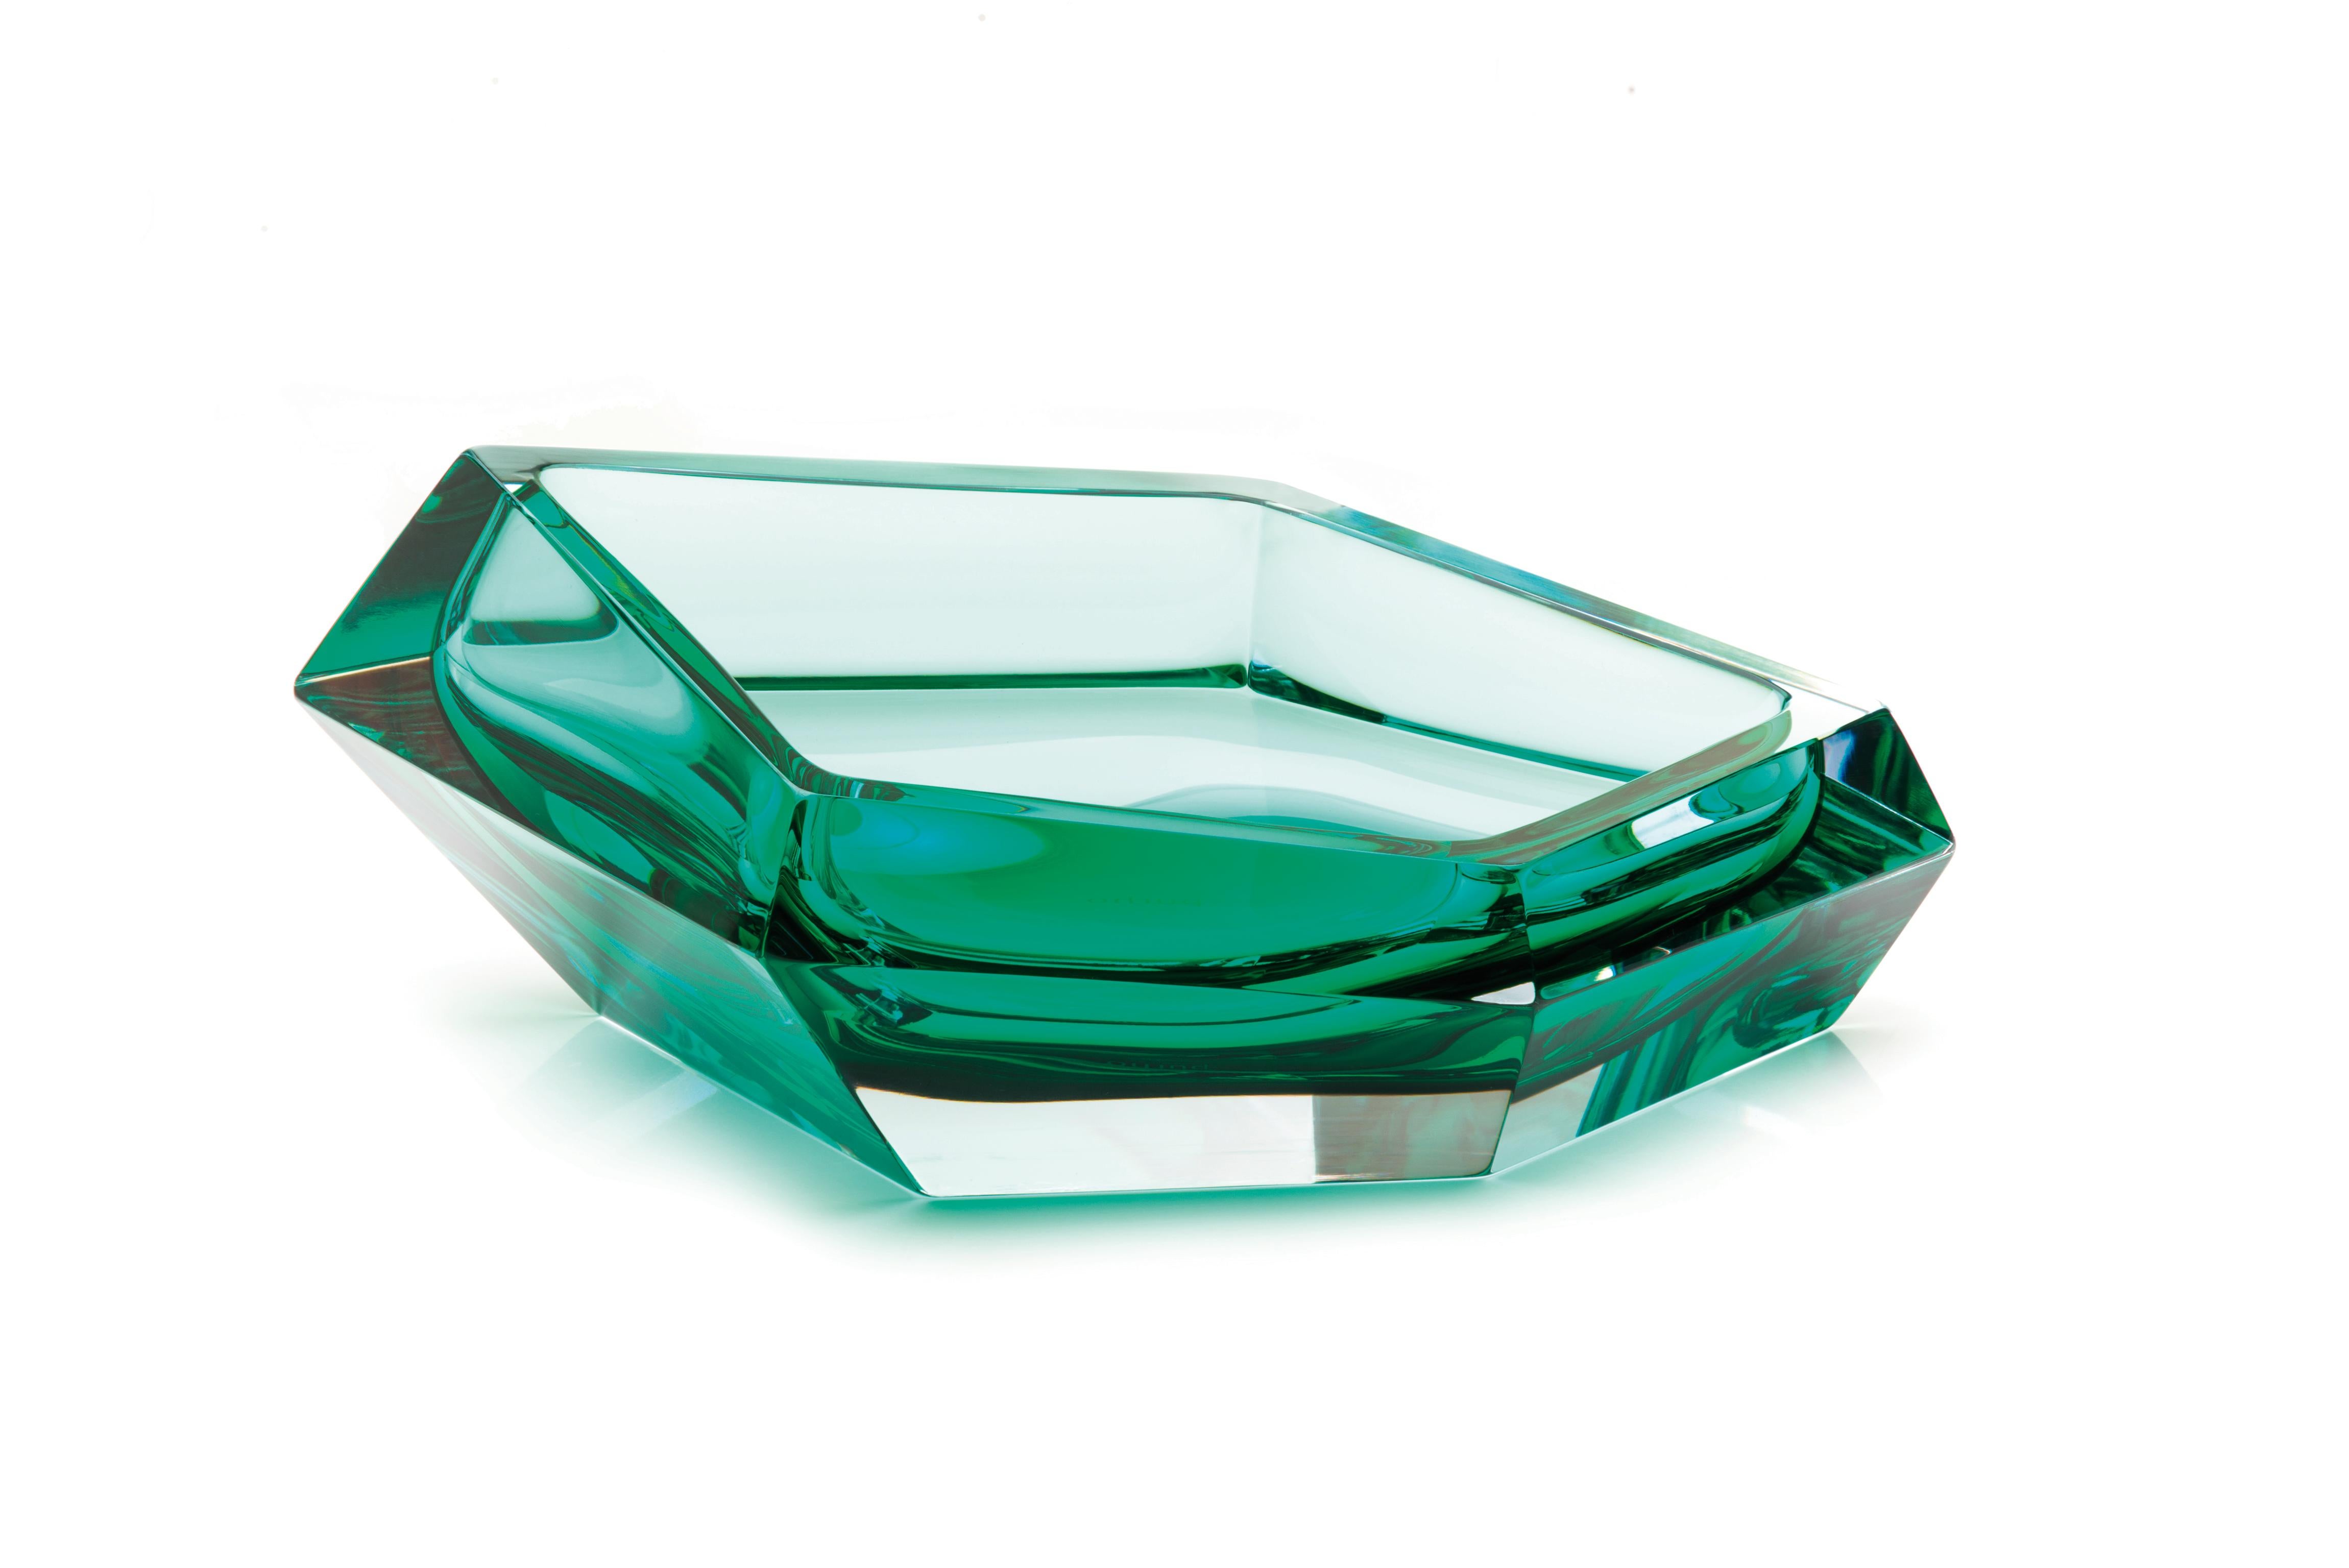 Kastle green large bowl by Purho
Dimensions: D40 x W30 x H14cm
Materials: Glass
Other colours and dimensions are available.

Purho is a new protagonist of made in Italy design , a work of synthesis, a research that has lasted for years, an